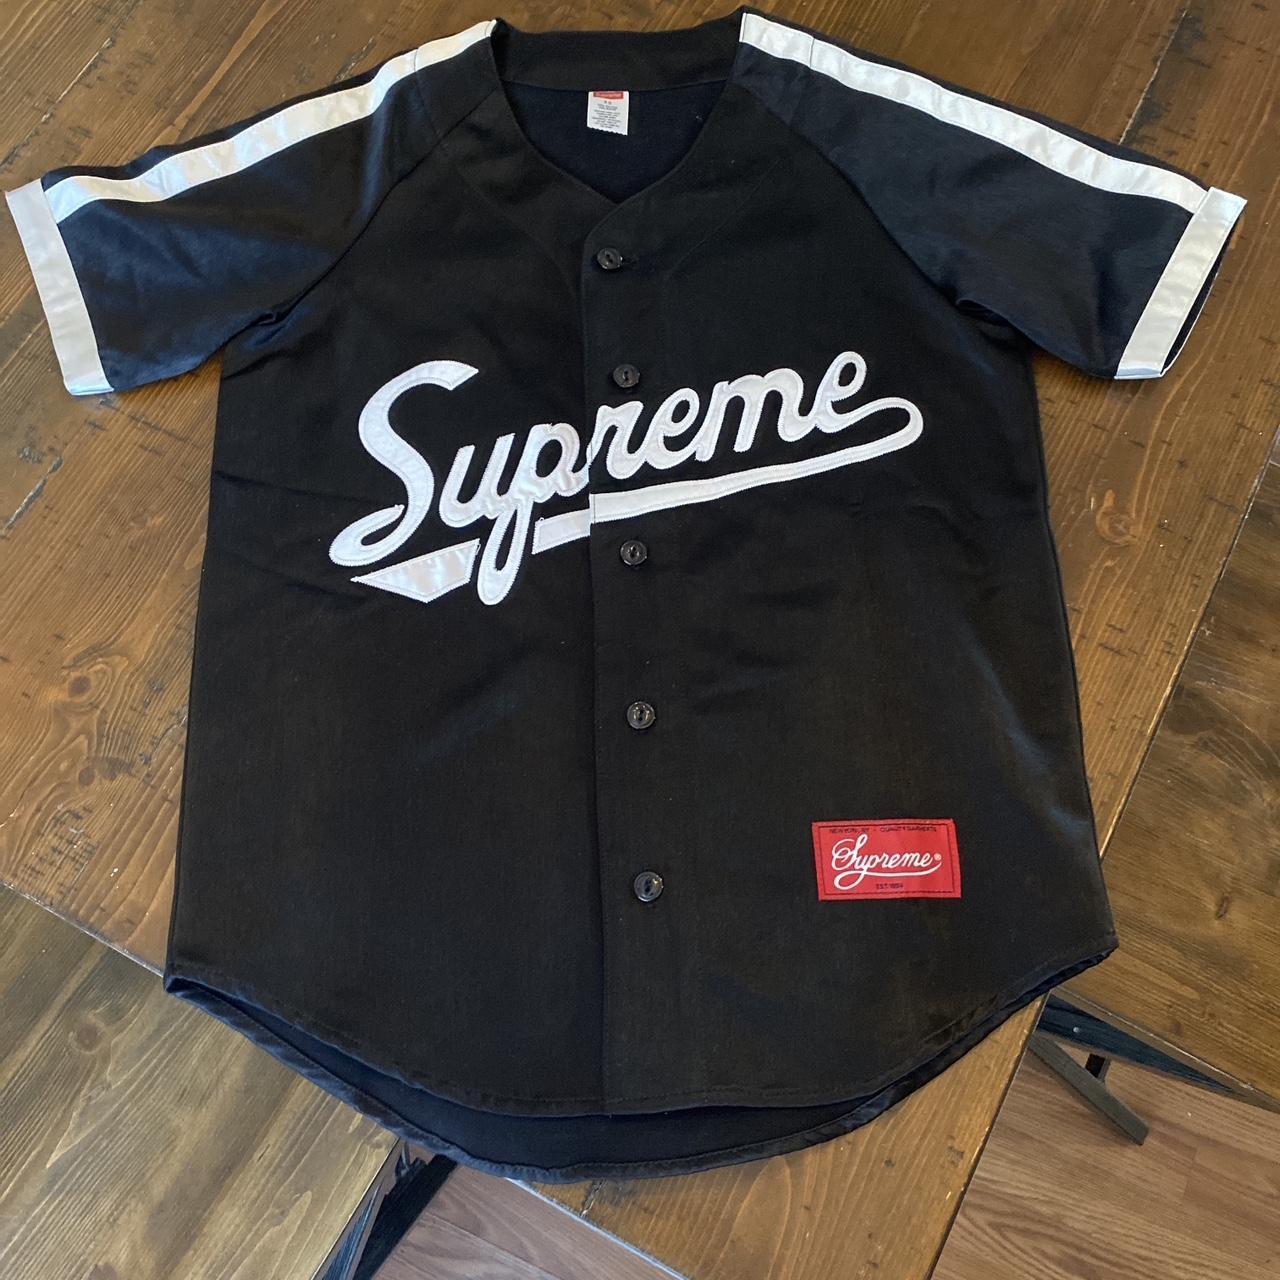 Supreme thick button-up baseball jersey. Perfect for - Depop